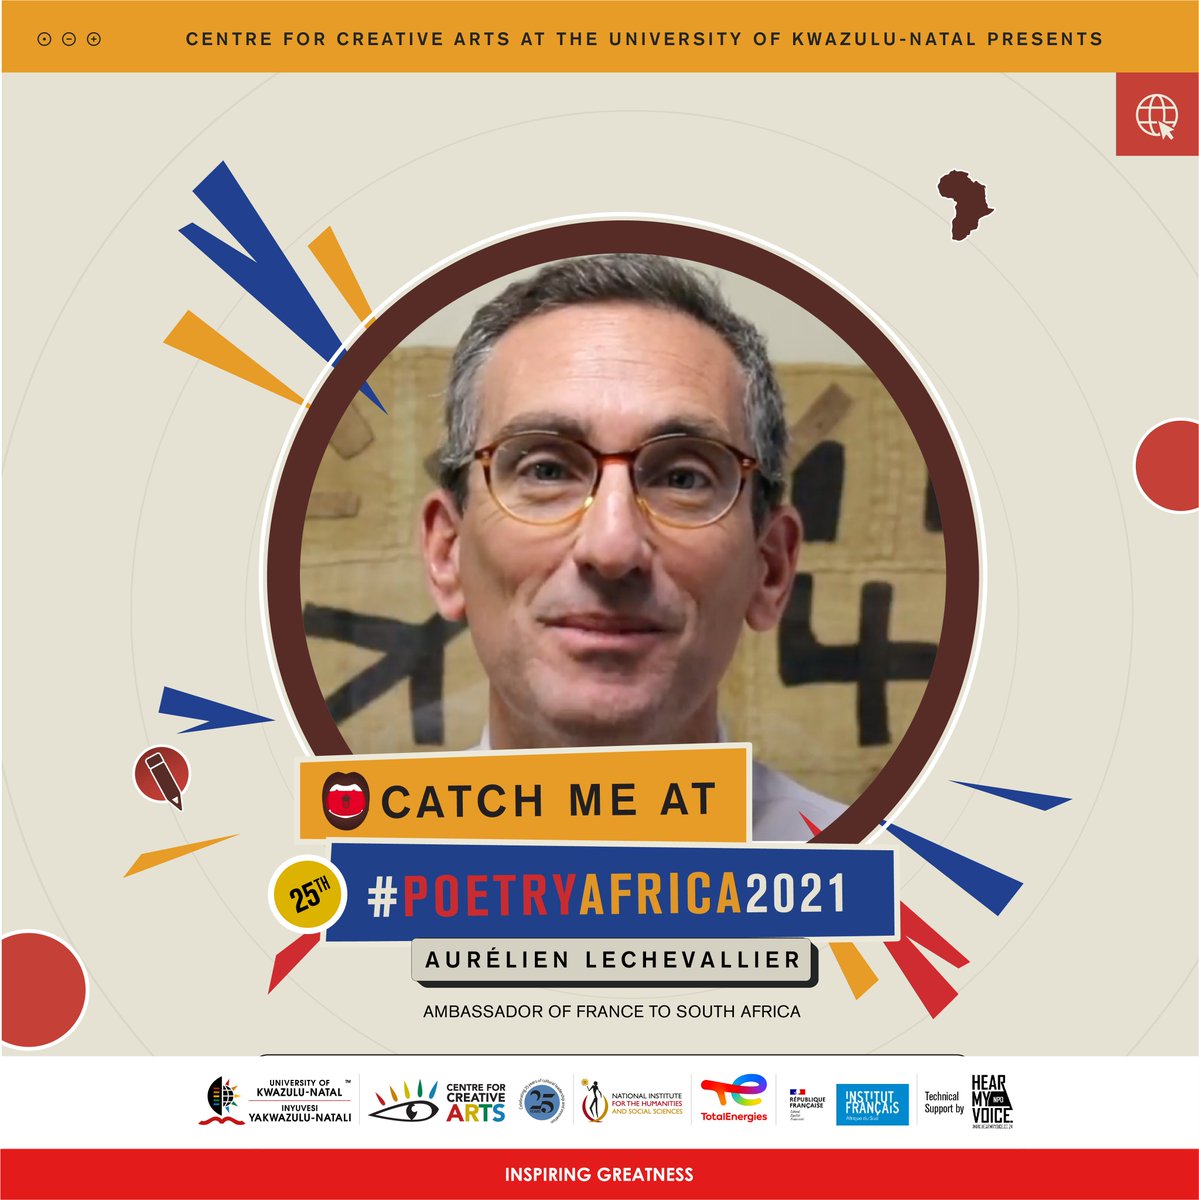 Poetry Africa is live now!

Click on any of the below links to join the Ambassador of @FrenchEmbassyZA, H.E,  Aurélien Lechevallier.

Youtube➡️youtube.com/watch?v=KUaddy…

FB➡️ fb.watch/8zK17jHzwa/

#unmute #officialopening #poetryafricafestival #PowertothePoet